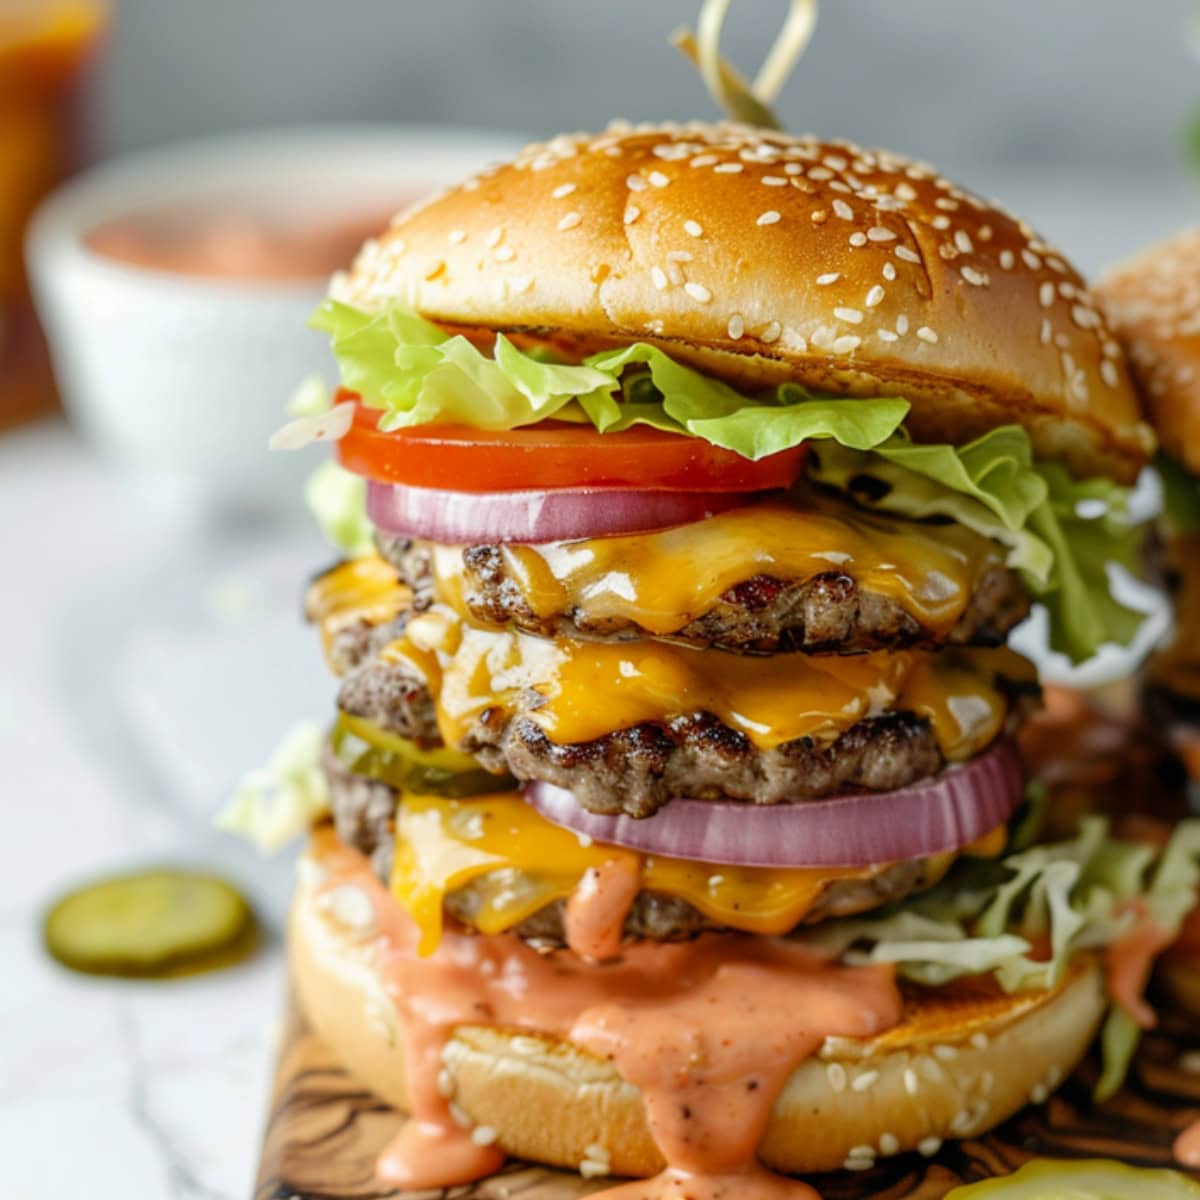 Triple patty burger with tomatoes, lettuce, melted cheese and dressing.